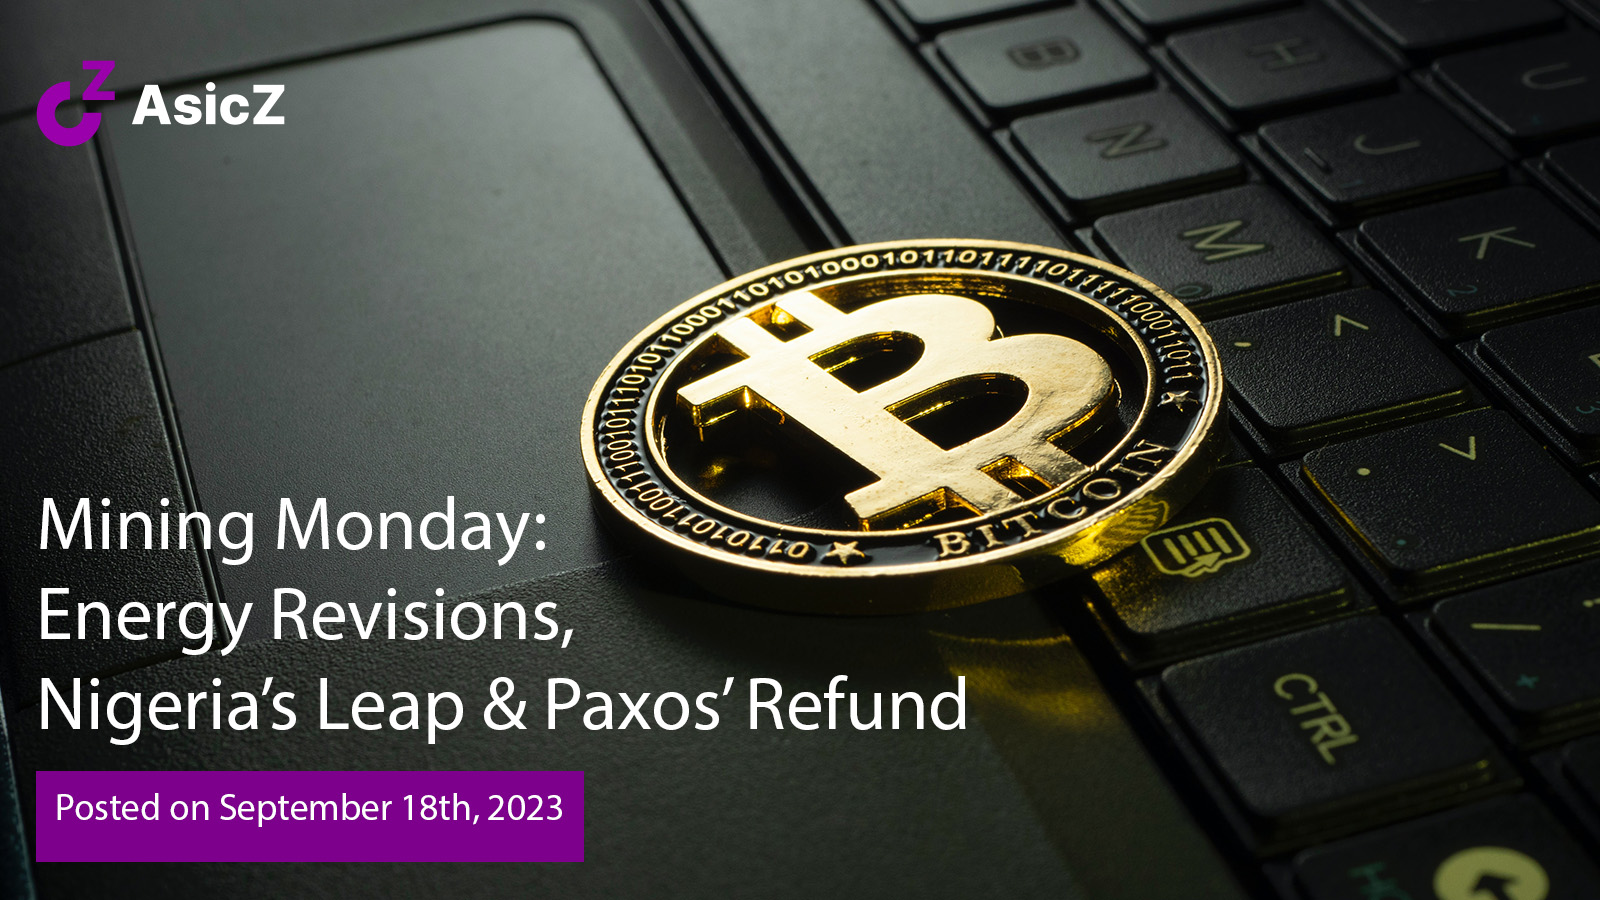 Mining Monday: Energy Revisions, Nigeria’s Leap & Paxos’ Refund